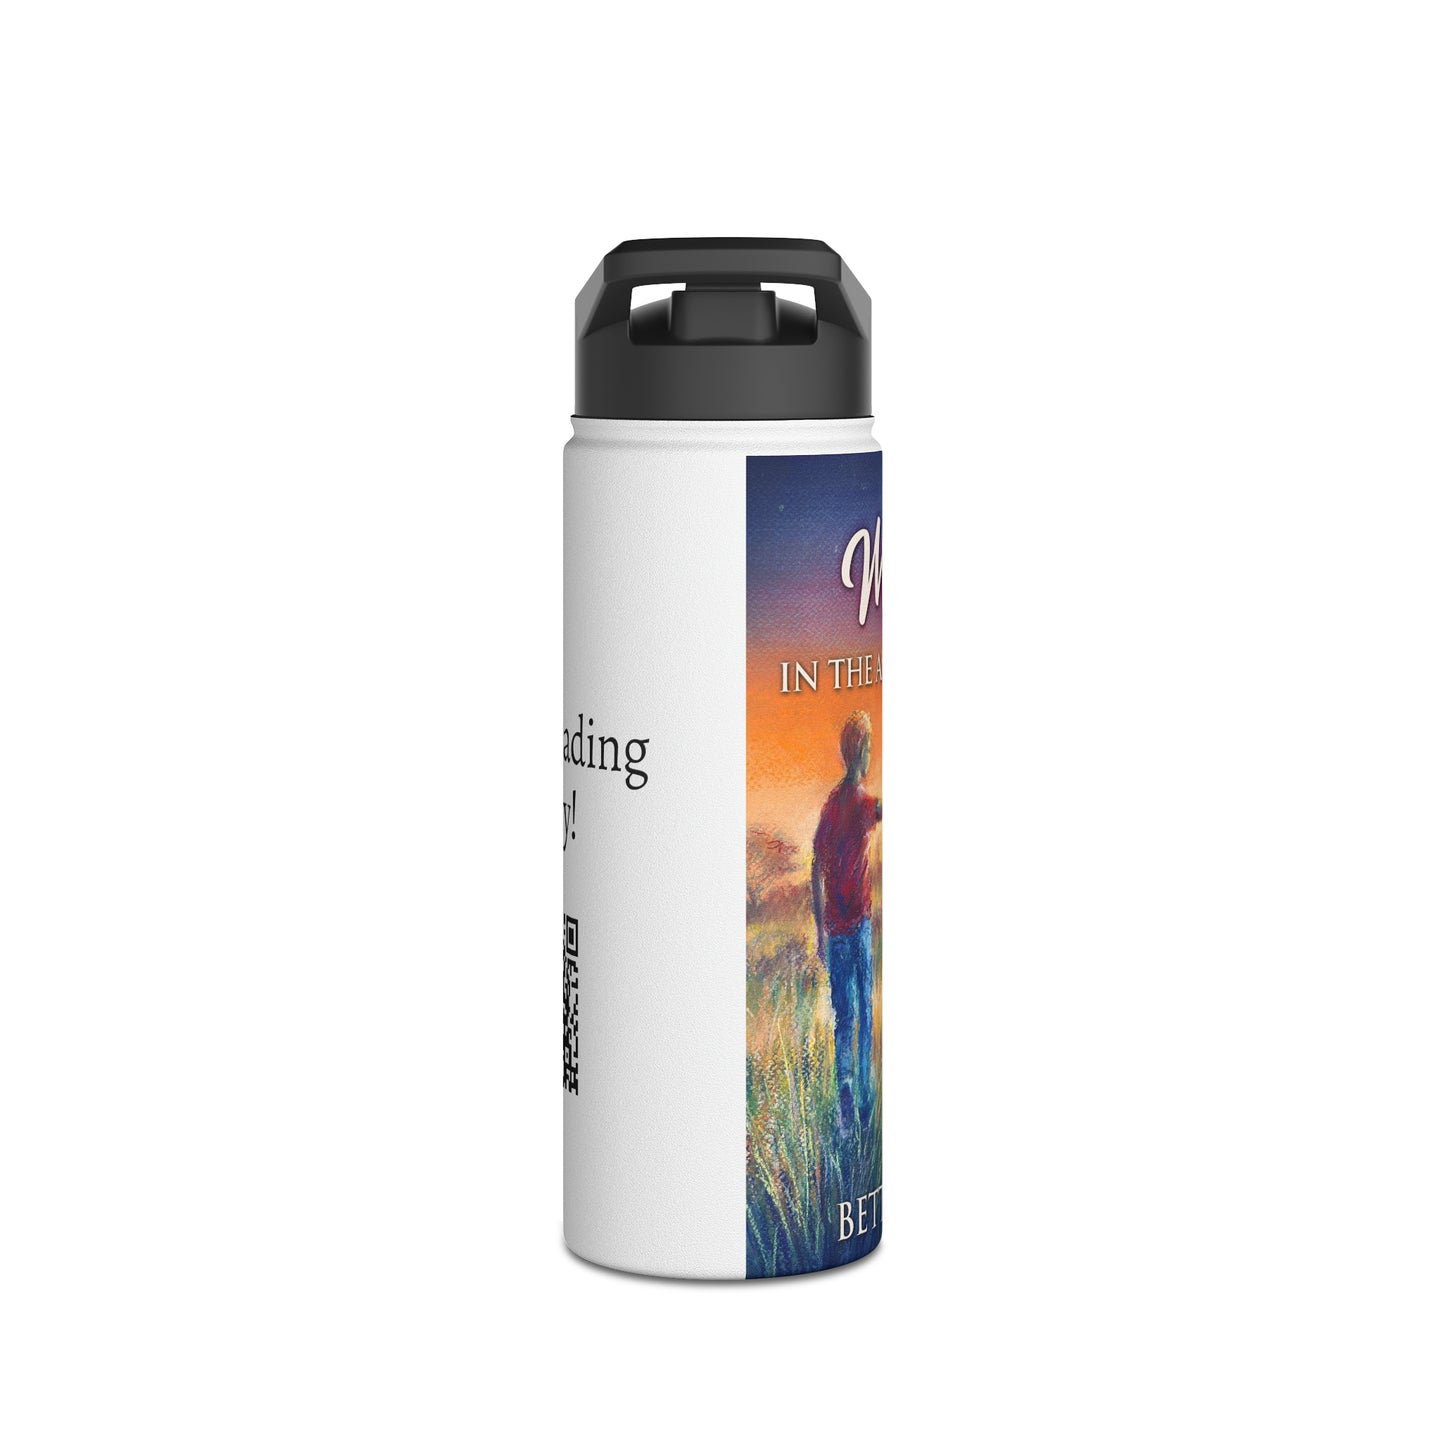 Magic In The African Bush - Stainless Steel Water Bottle